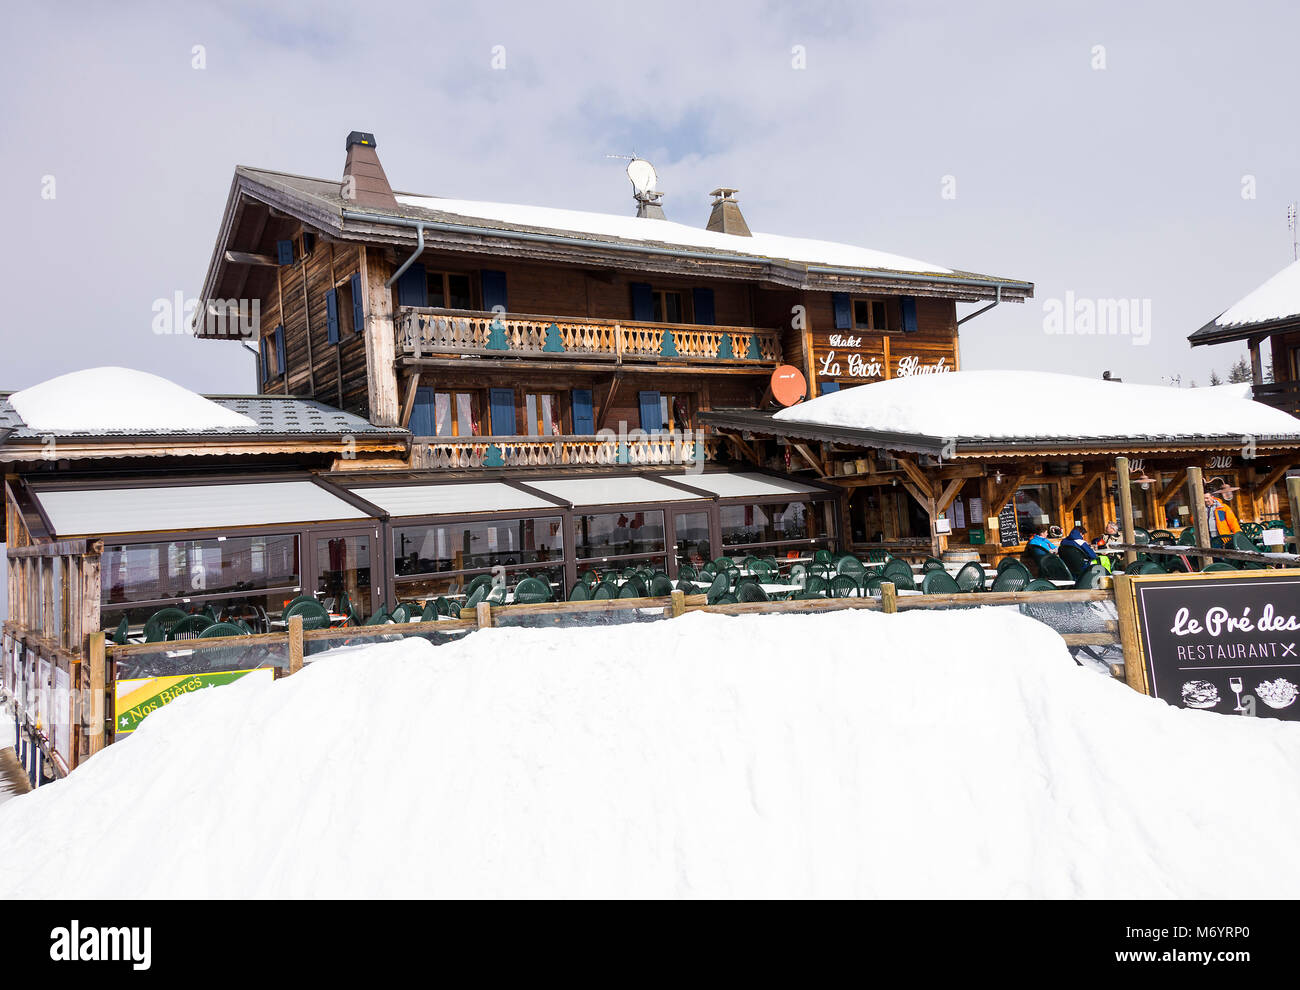 The Restful Chalet La Croix Blanche Restaurant and Bar in the Ski Resort of Les Gets in the French Alps Morzine Haute Savoie Portes du Soleil France Stock Photo